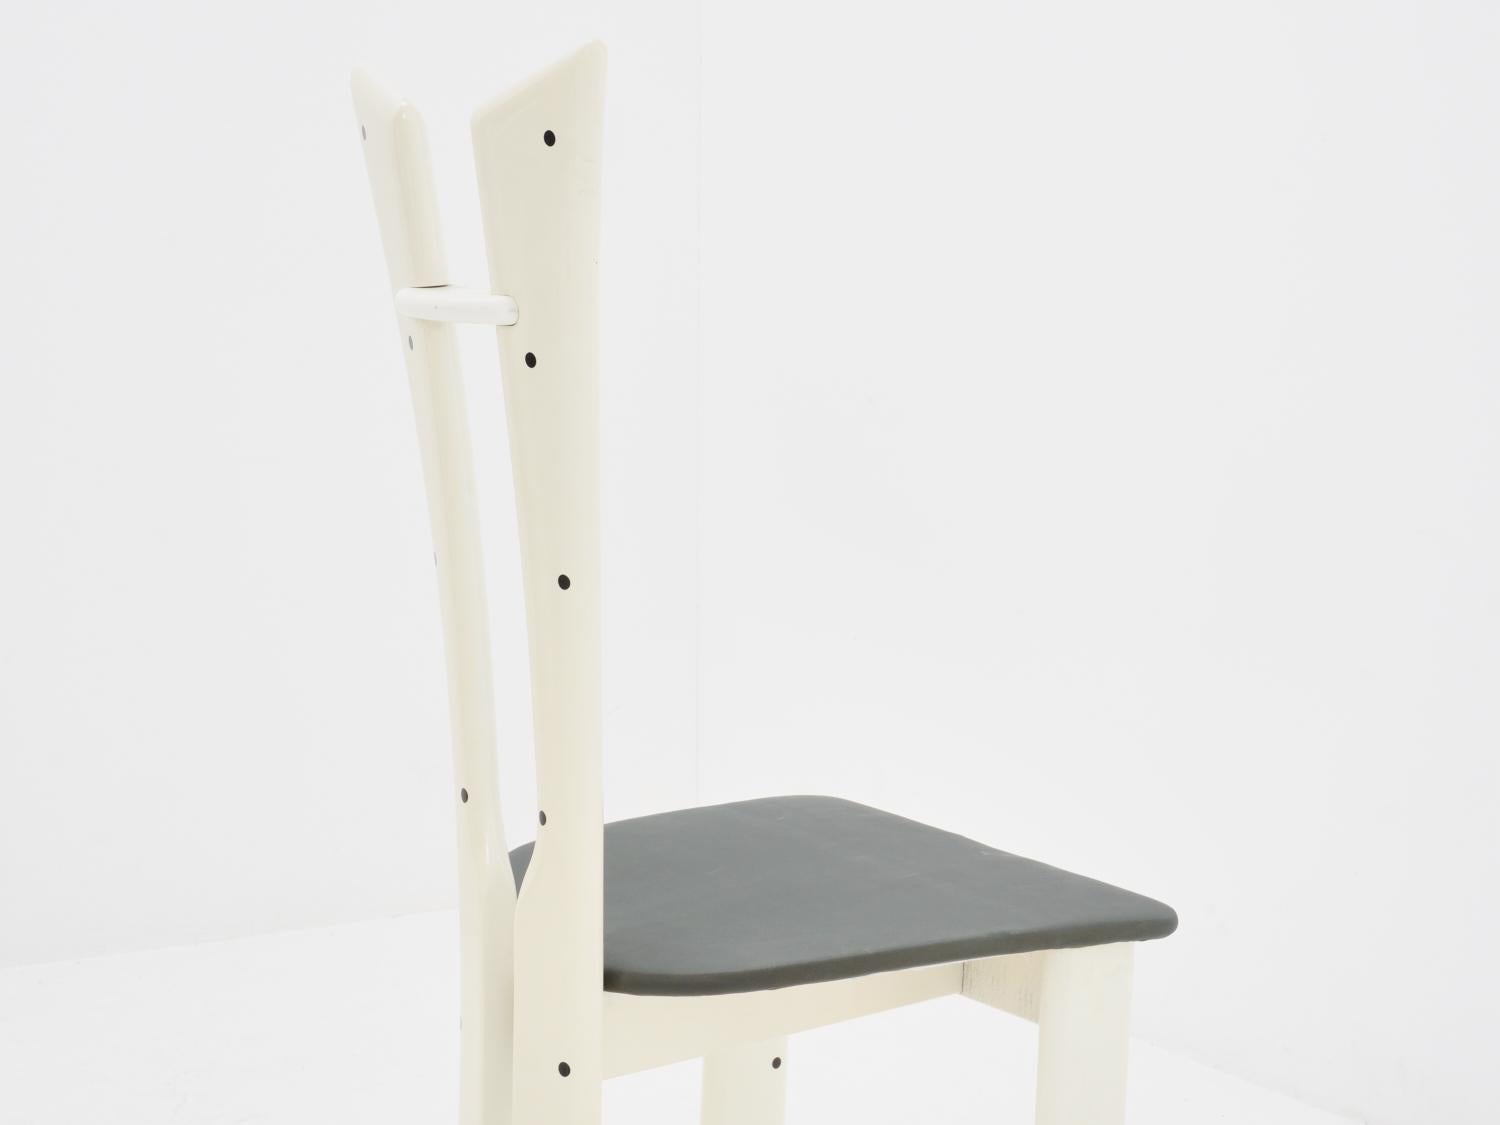 pierrot chairs